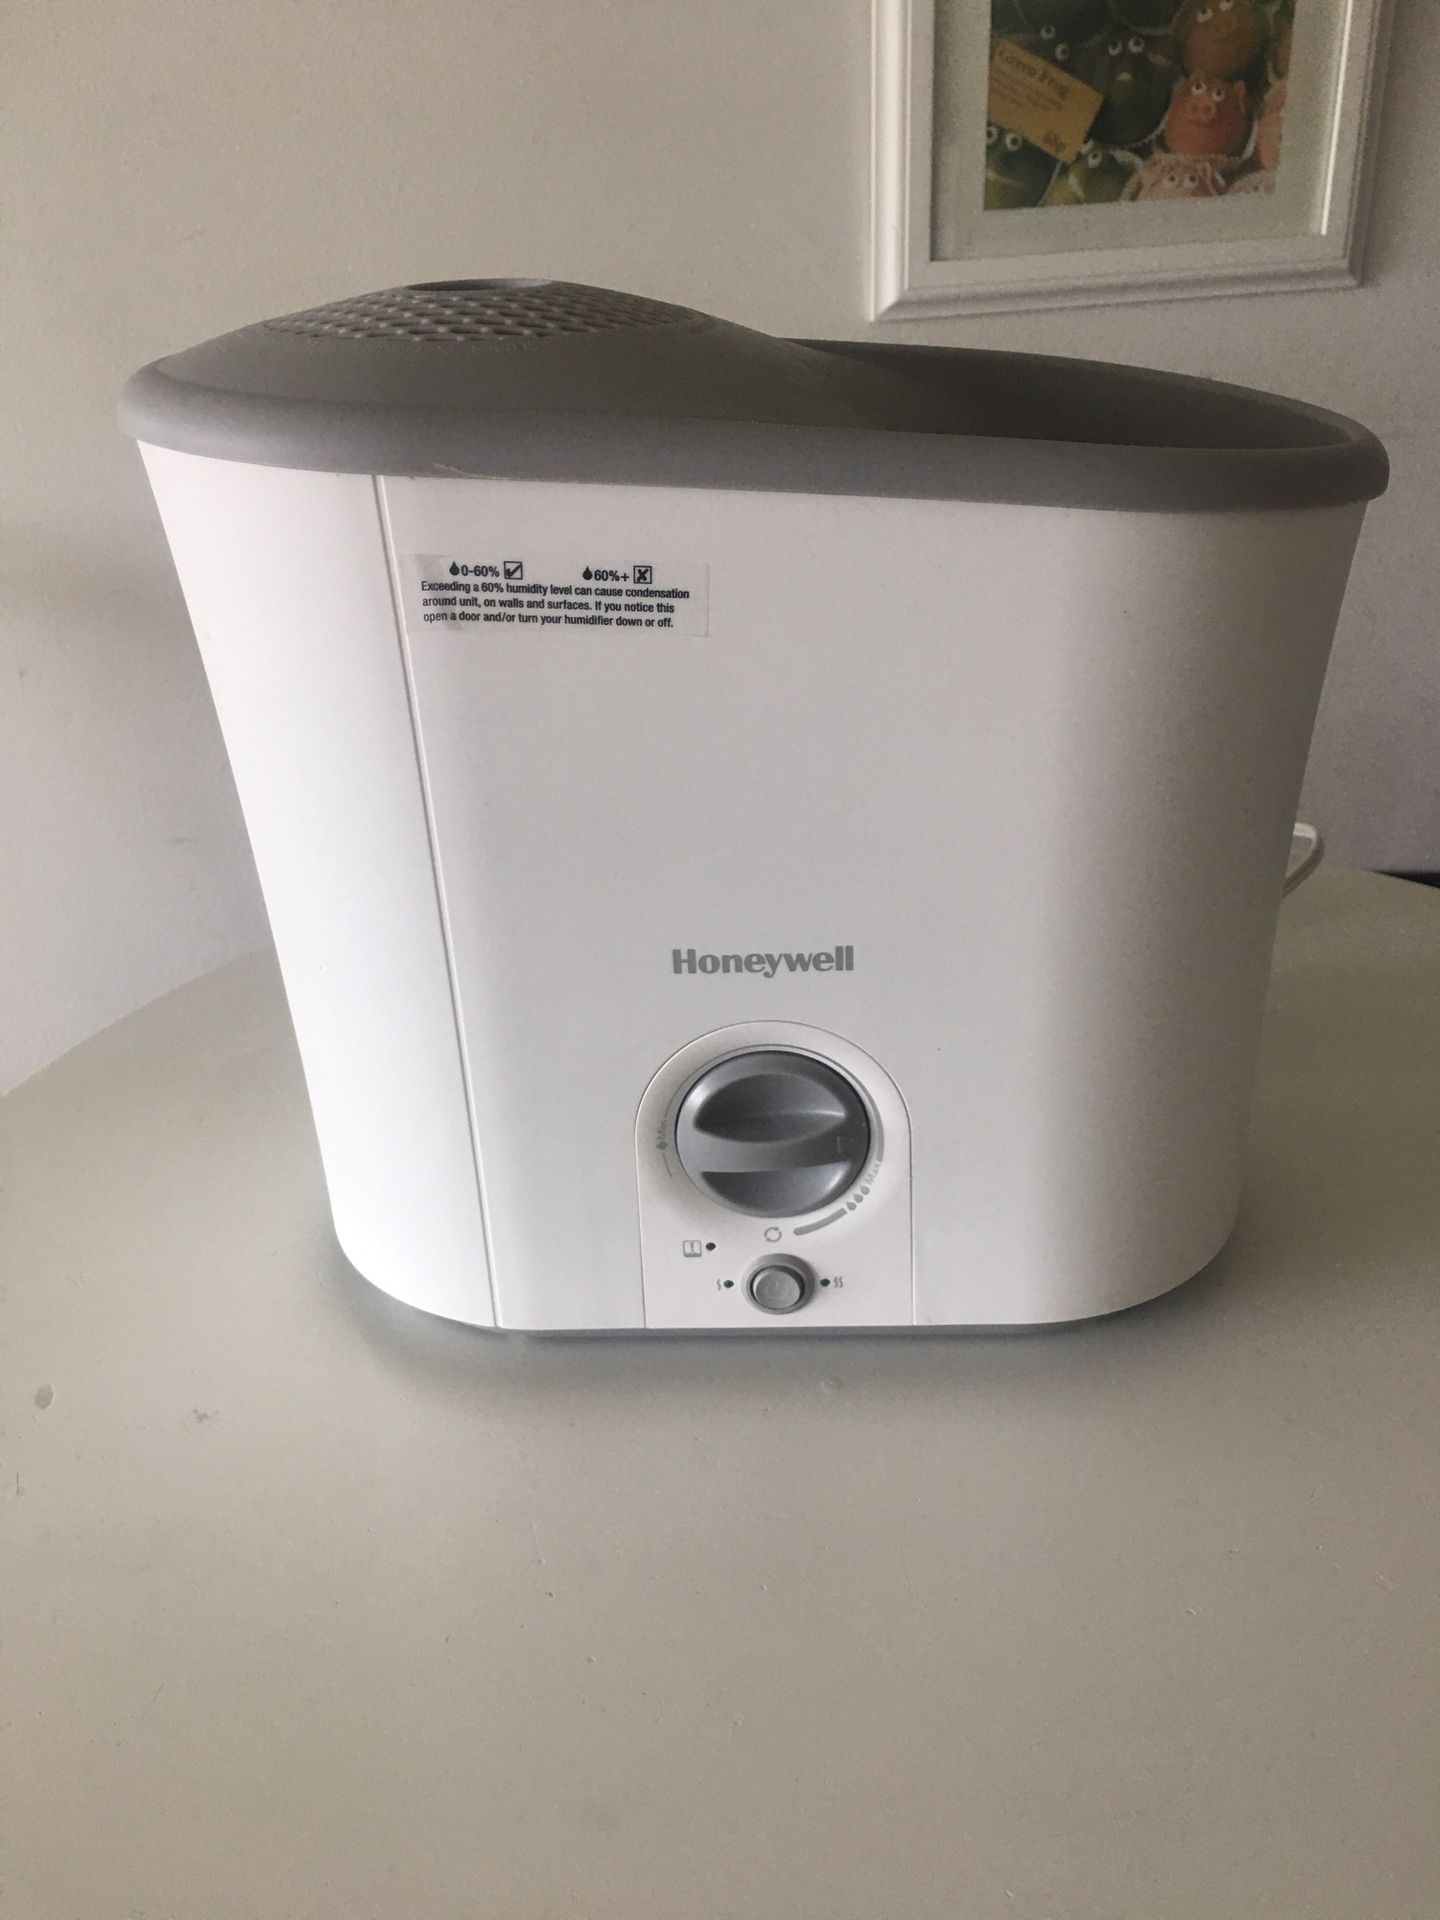 Honeywell Easy-to-care Warm Humidifier. 1.3 gallons